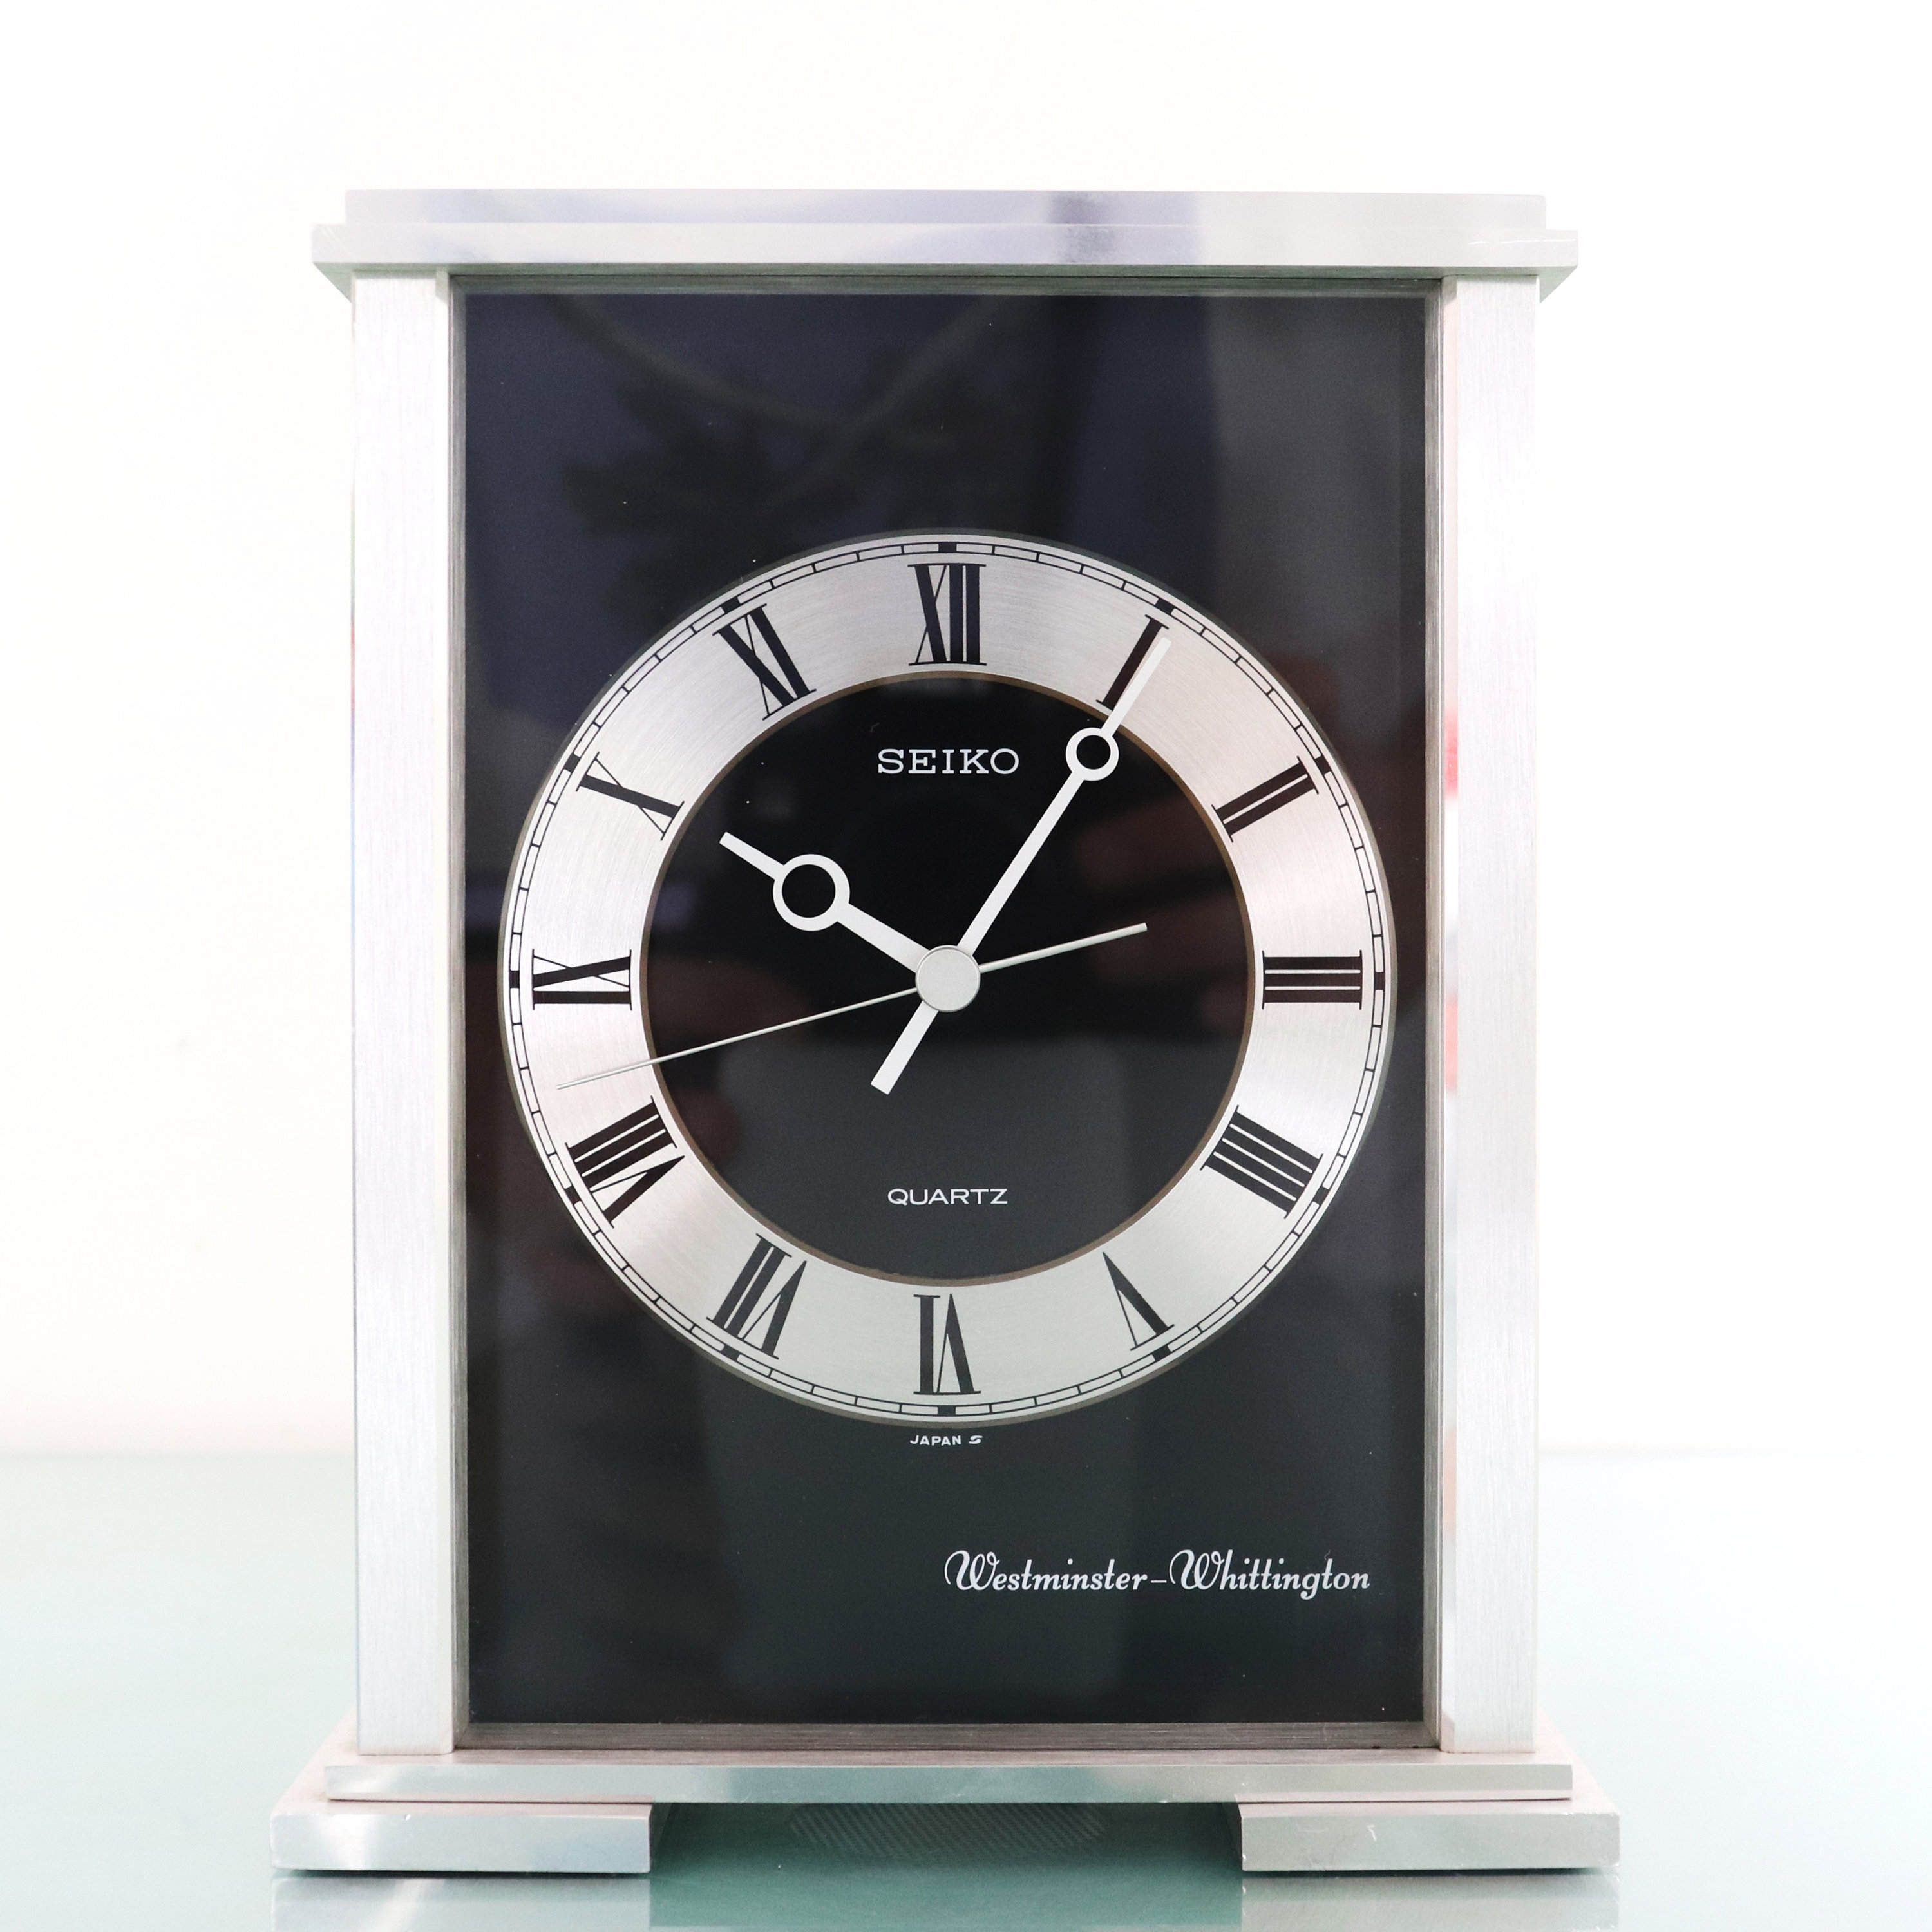 SEIKO Mantel Clock Qf144s Volume Control WESTMINSTER and - Etsy